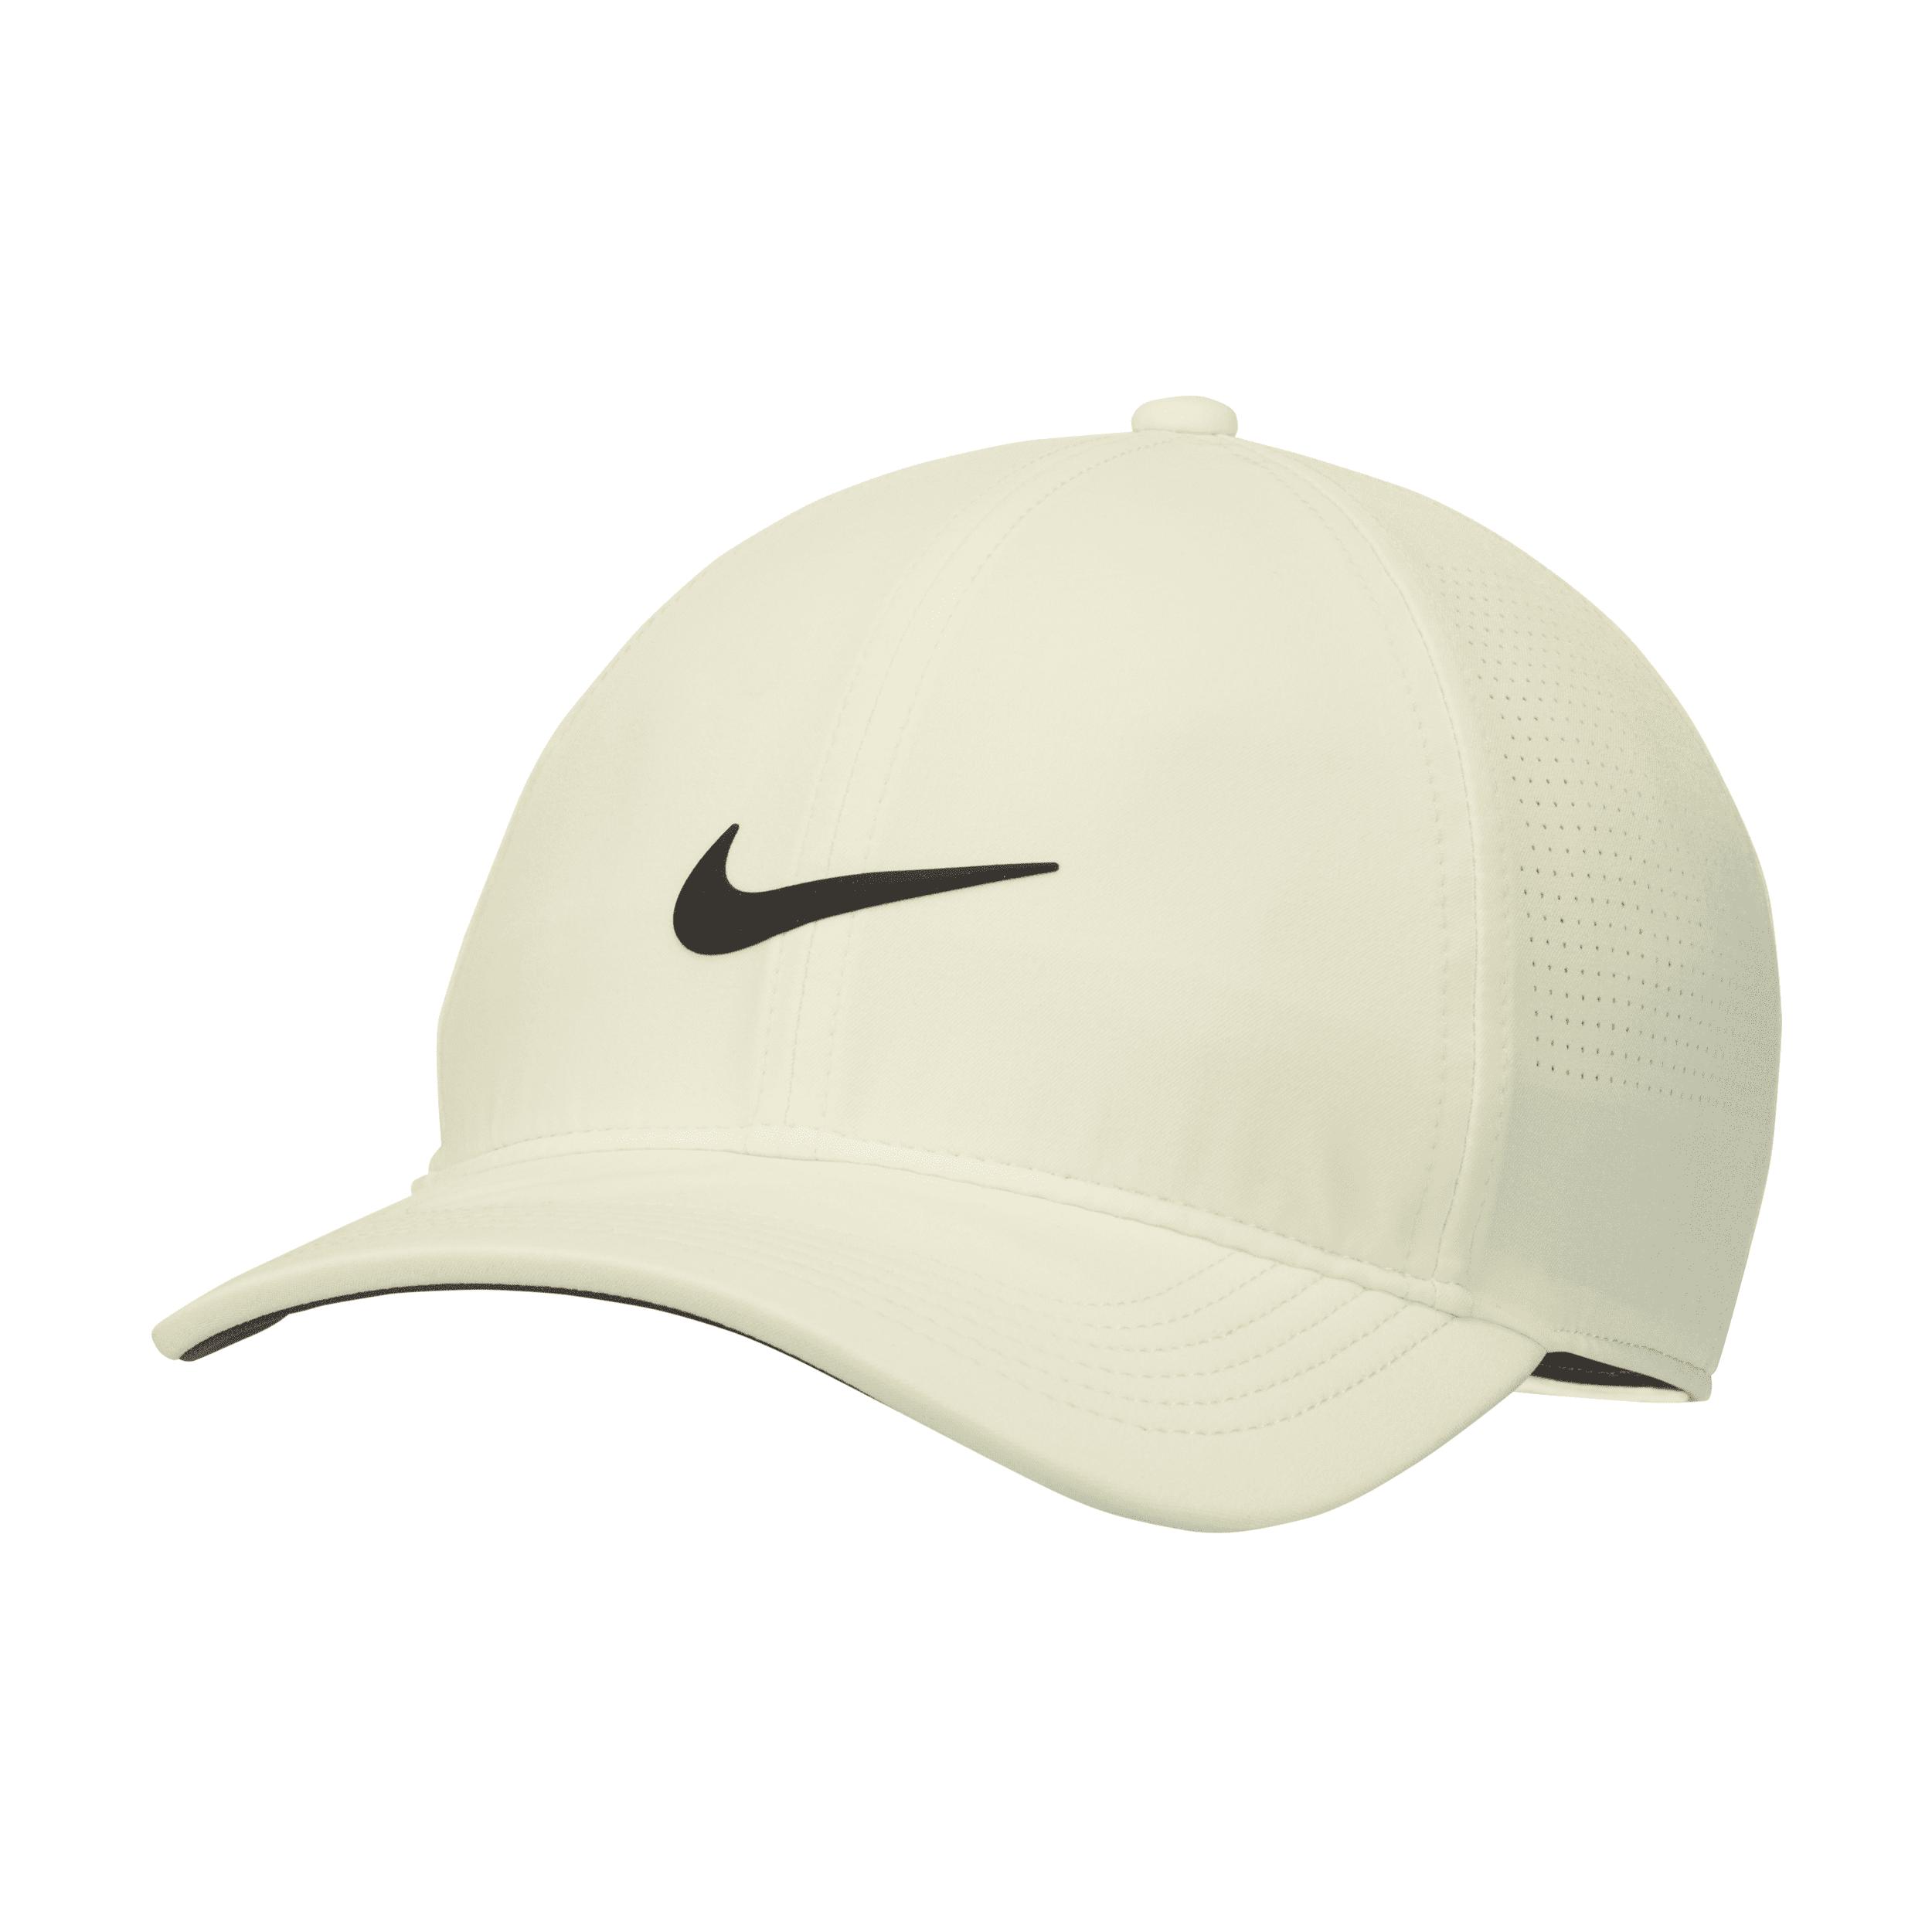 Nike Dri-fit Adv Aerobill Heritage86 Perforated Golf Hat In Yellow, in  Natural | Lyst